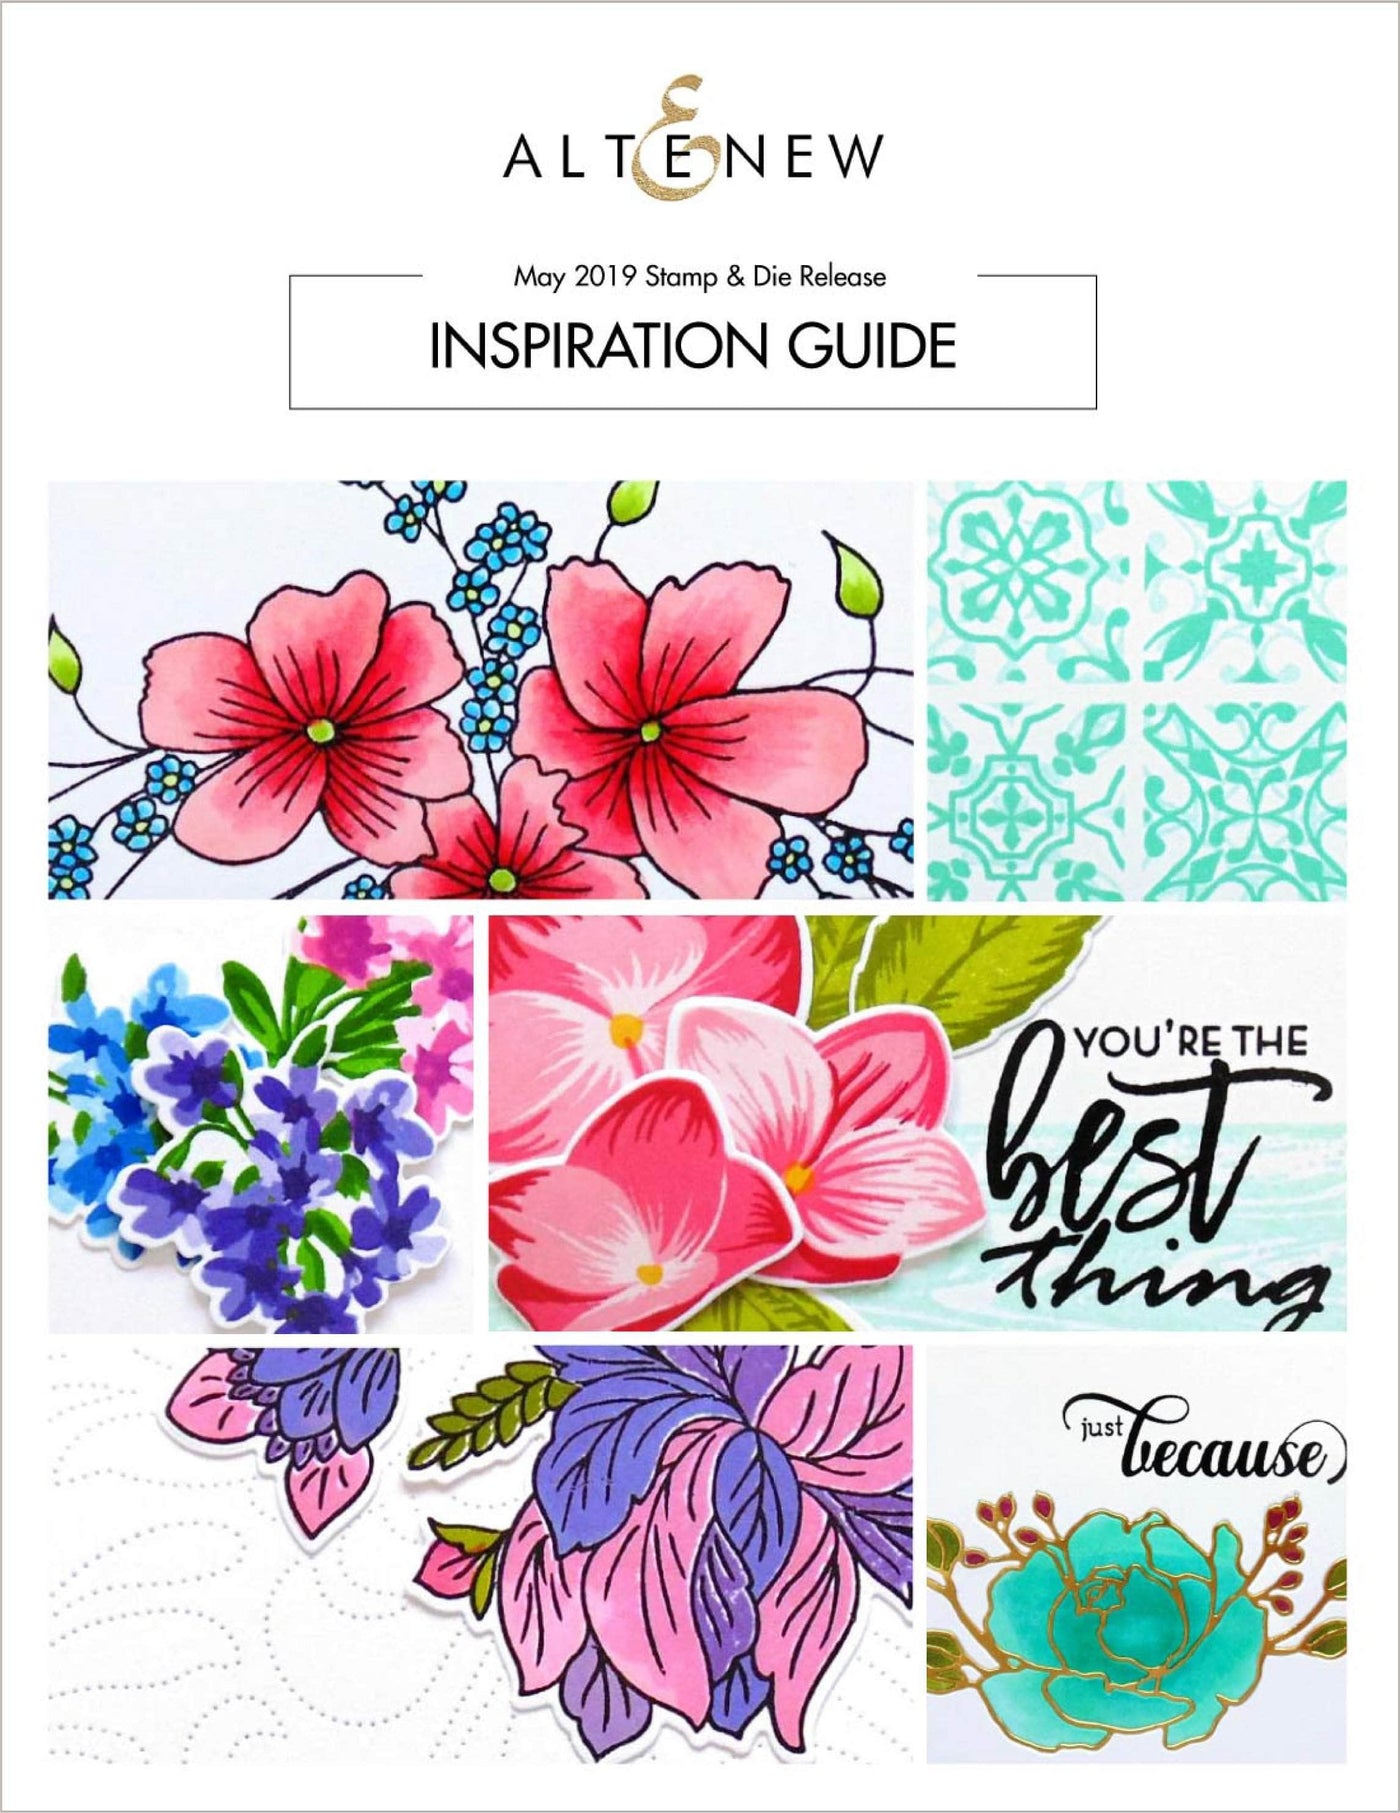 Printed Media Nature Trail Stamp & Die Release Inspiration Guide